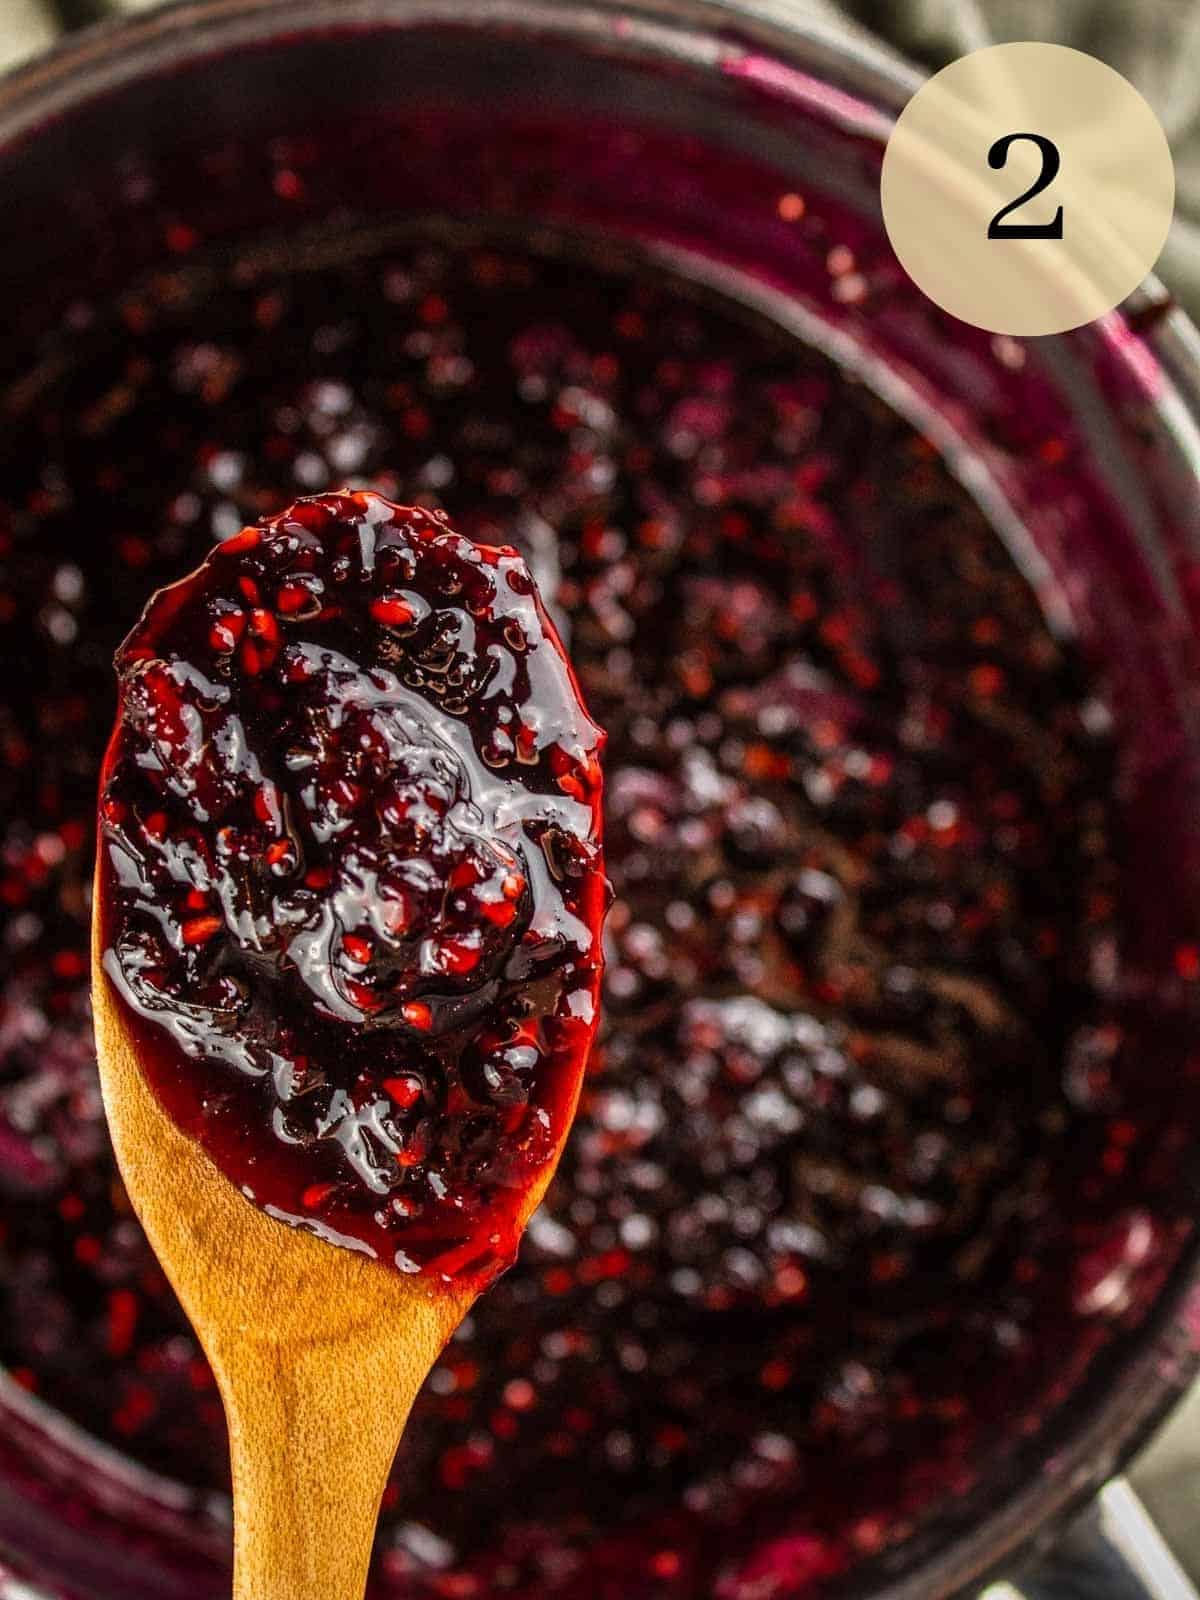 wooden spoon holding a scoop of homemade blackberry jam